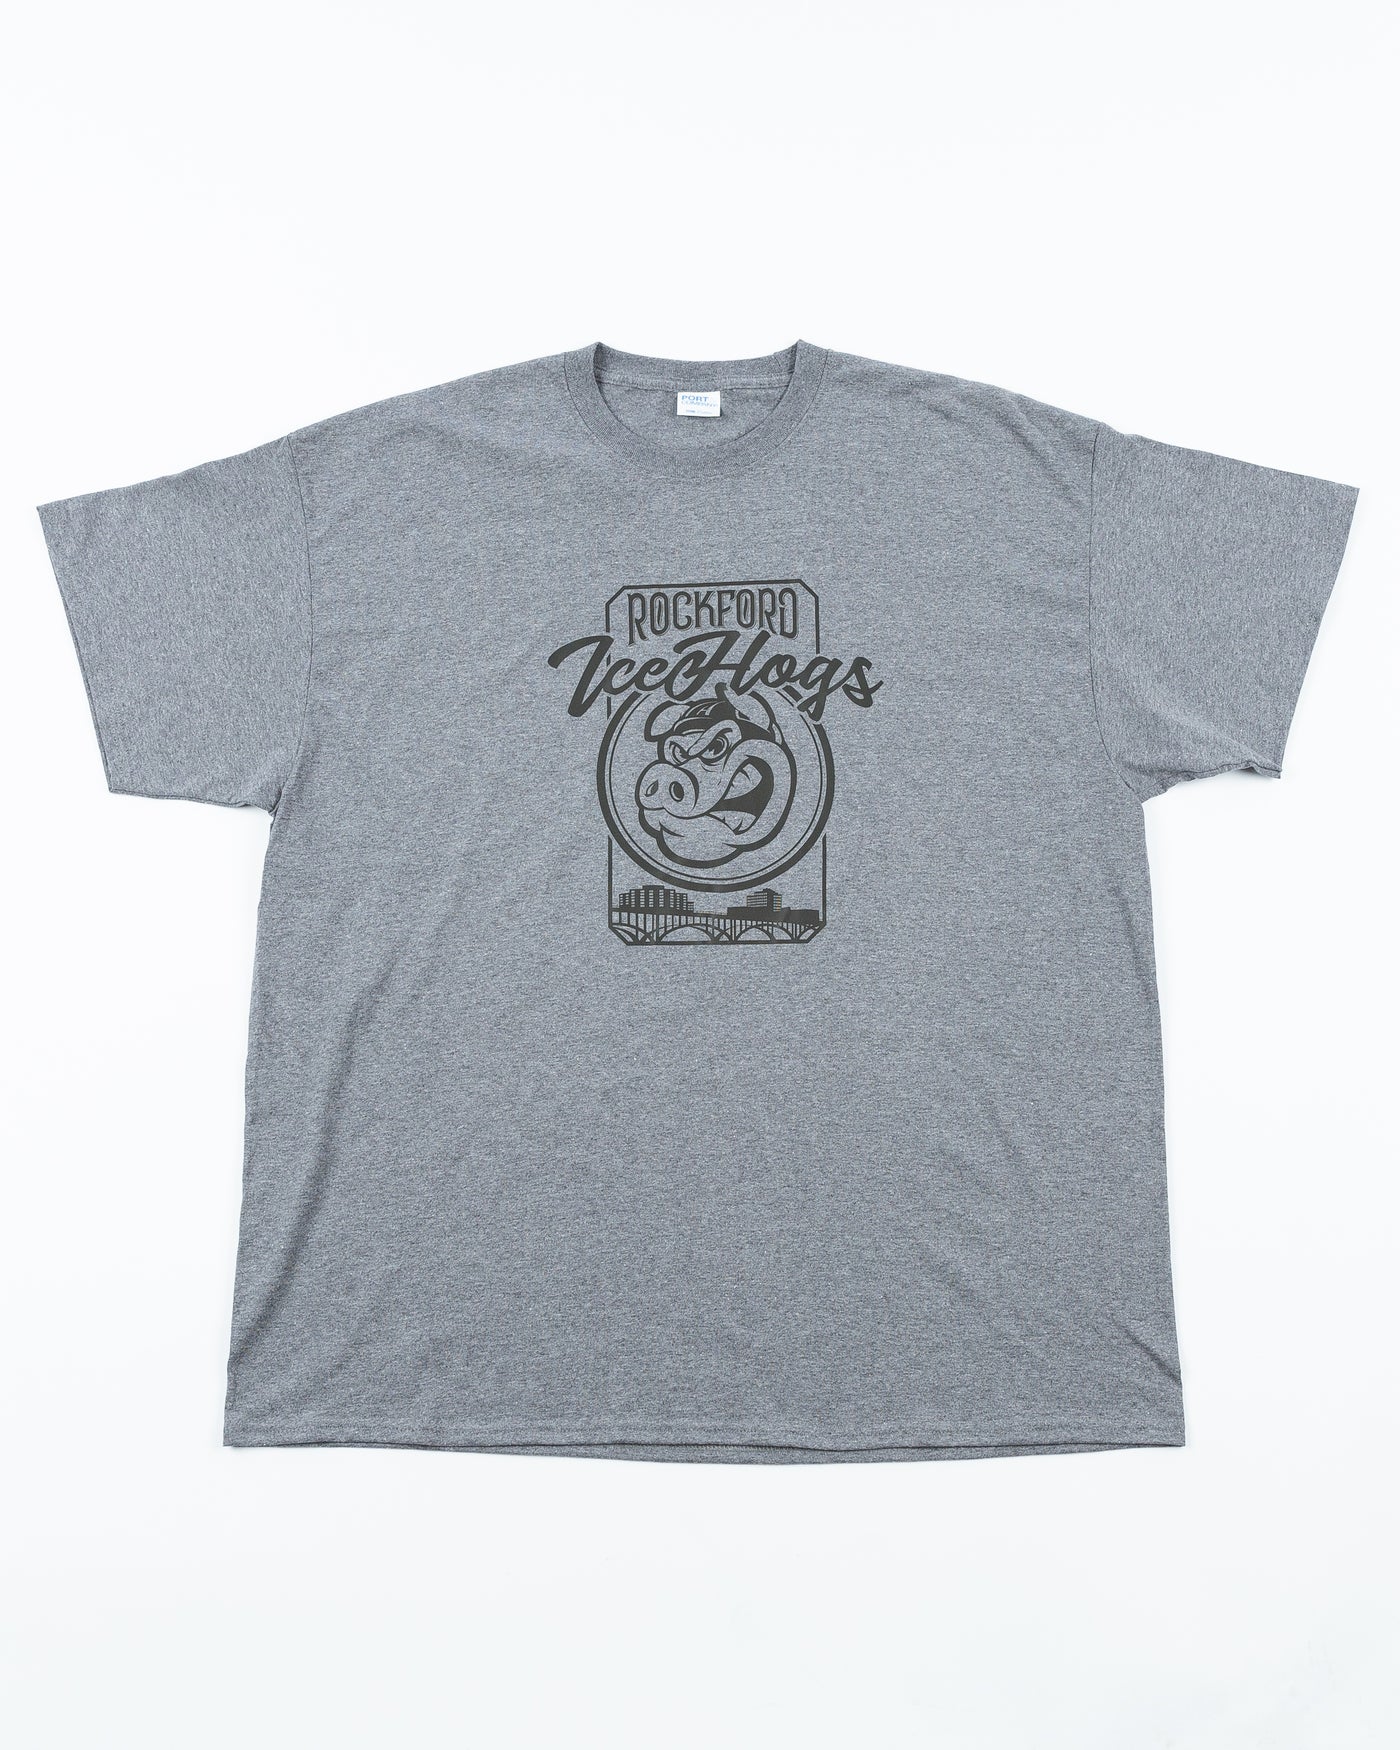 grey Rockford IceHogs tee with wordmark and Hammy and skyline inspired graphic across front - front lay flat